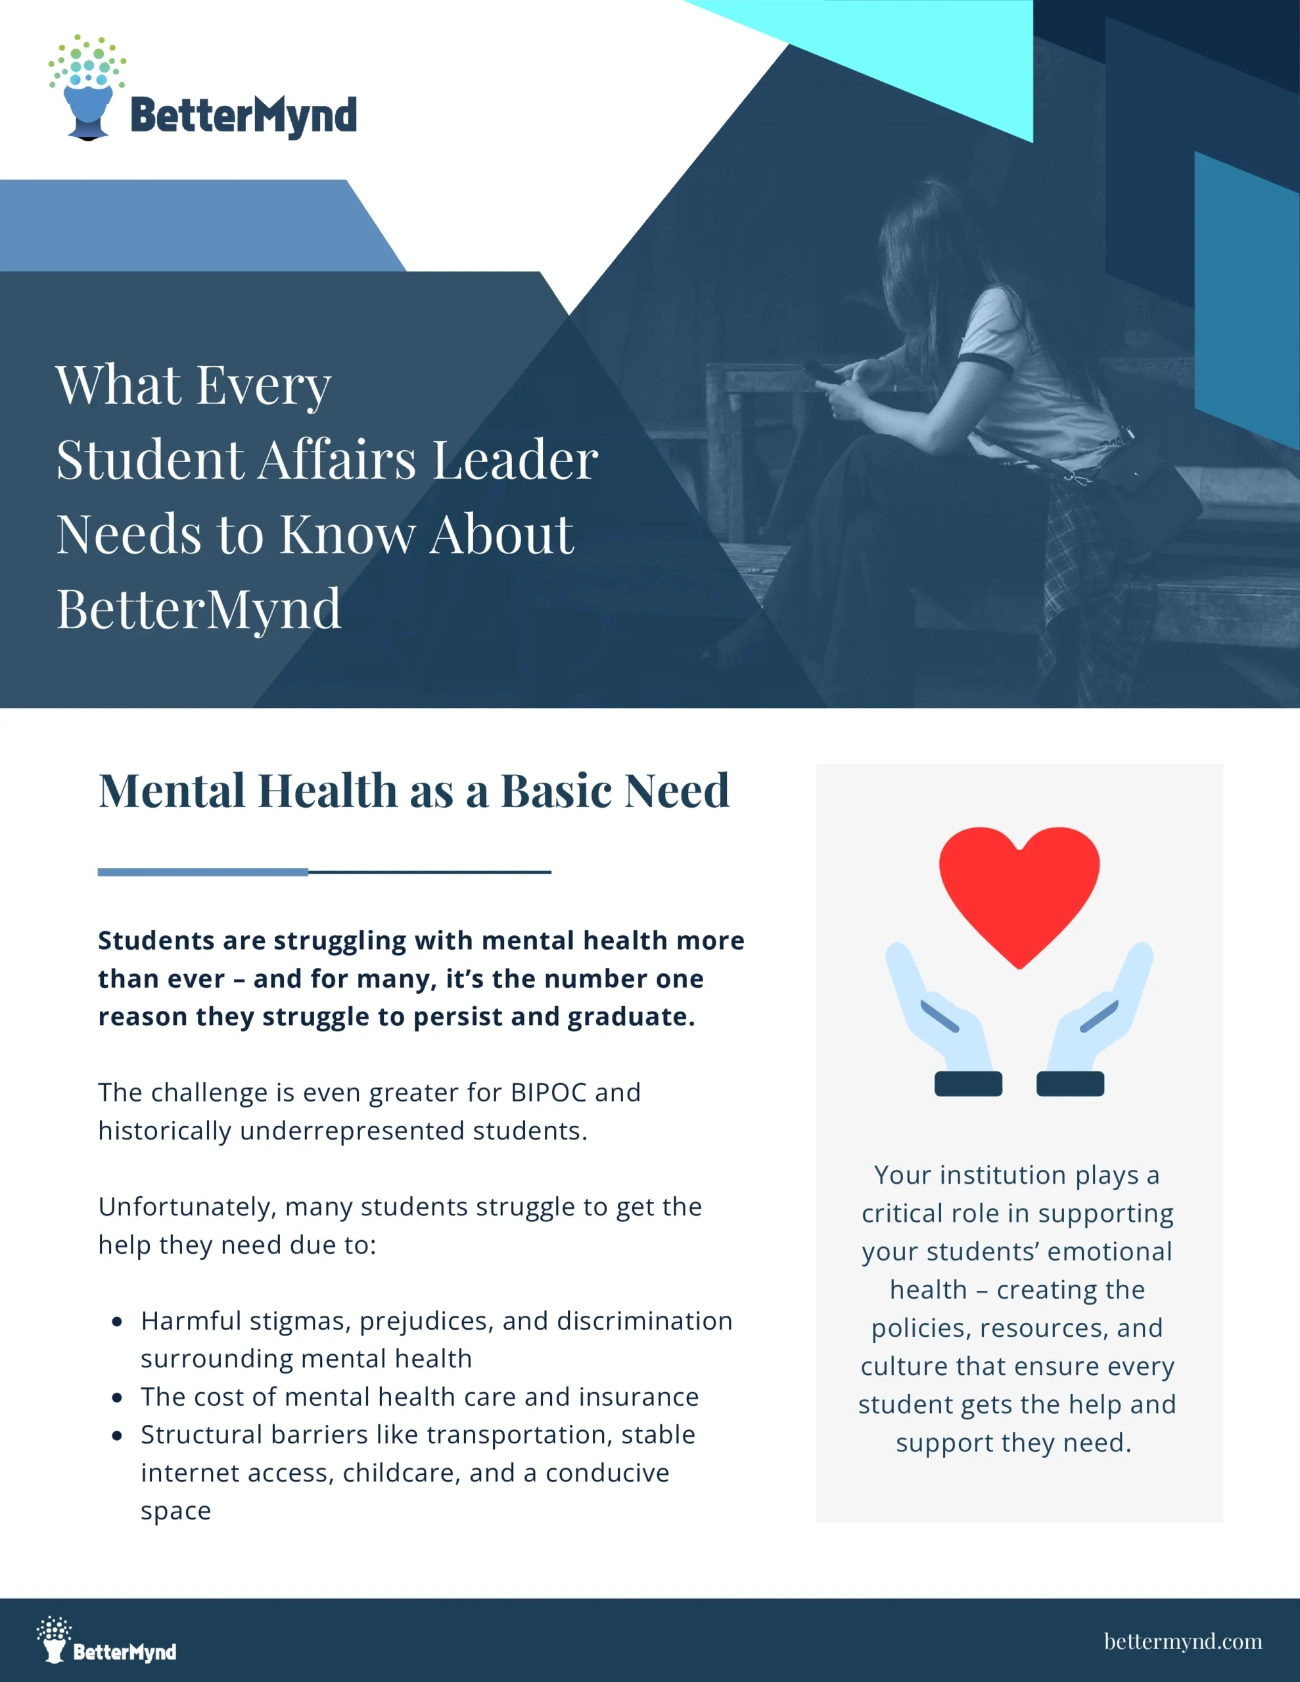 What Every Student Affairs Leader Needs to Know About BetterMynd